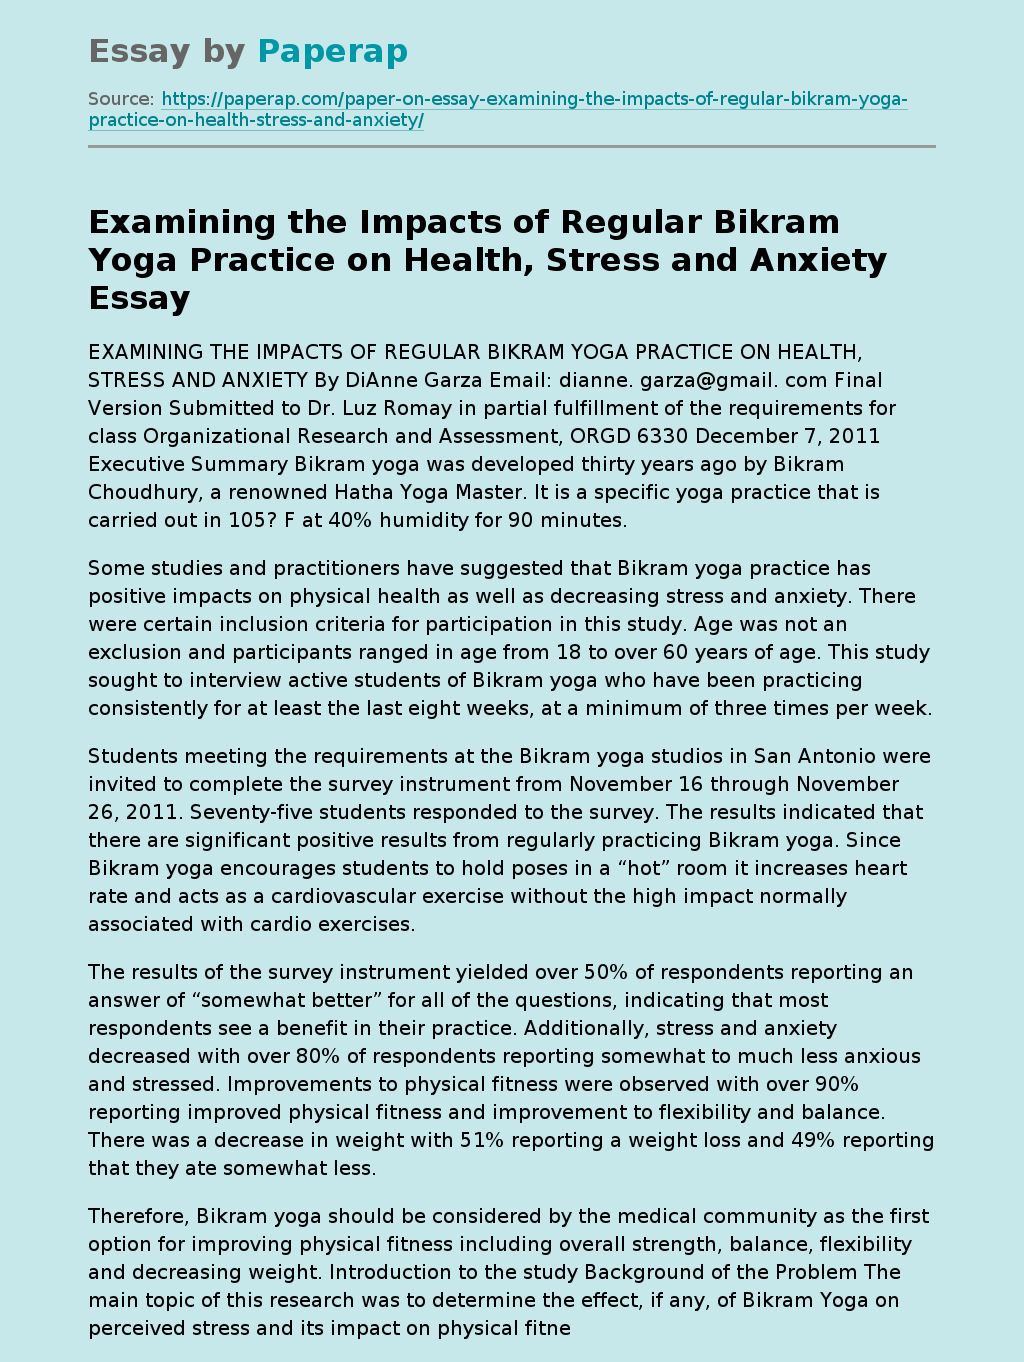 Examining the Impacts of Regular Bikram Yoga Practice on Health, Stress and Anxiety